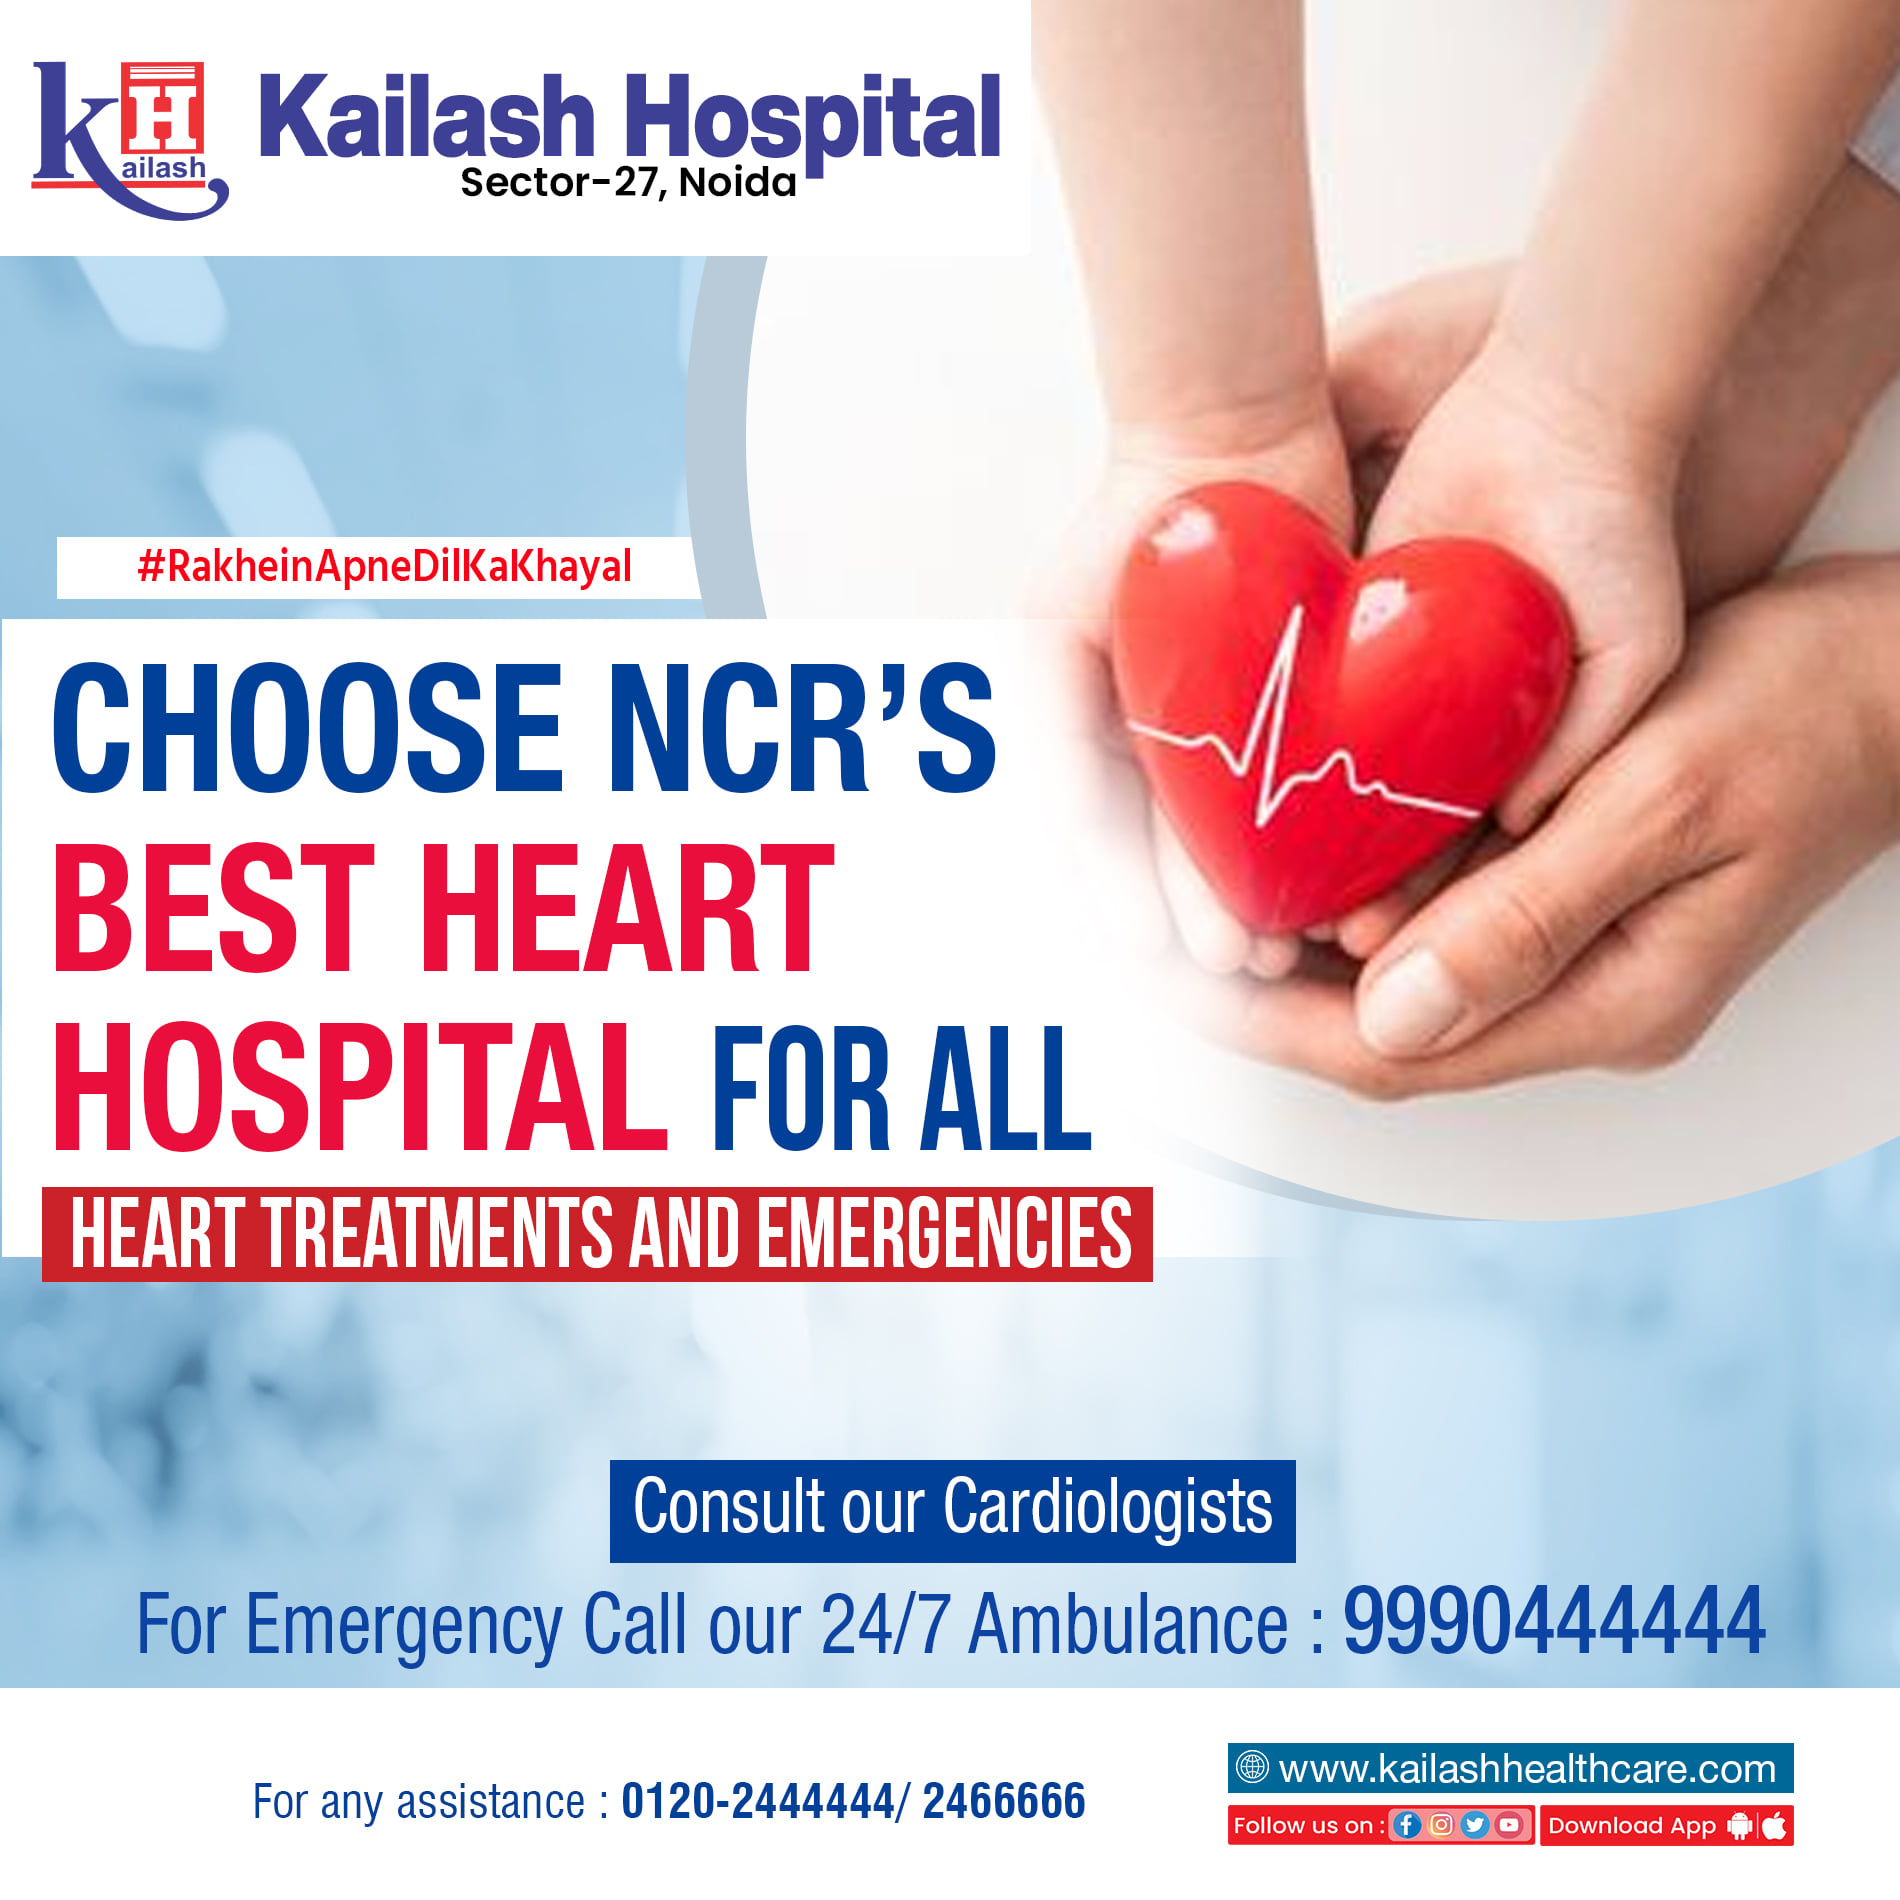 Most Cardiac Emergencies do not warn before attacking. Your Heart needs the Best Care. Choose NCR's No.1 Heart Hospital